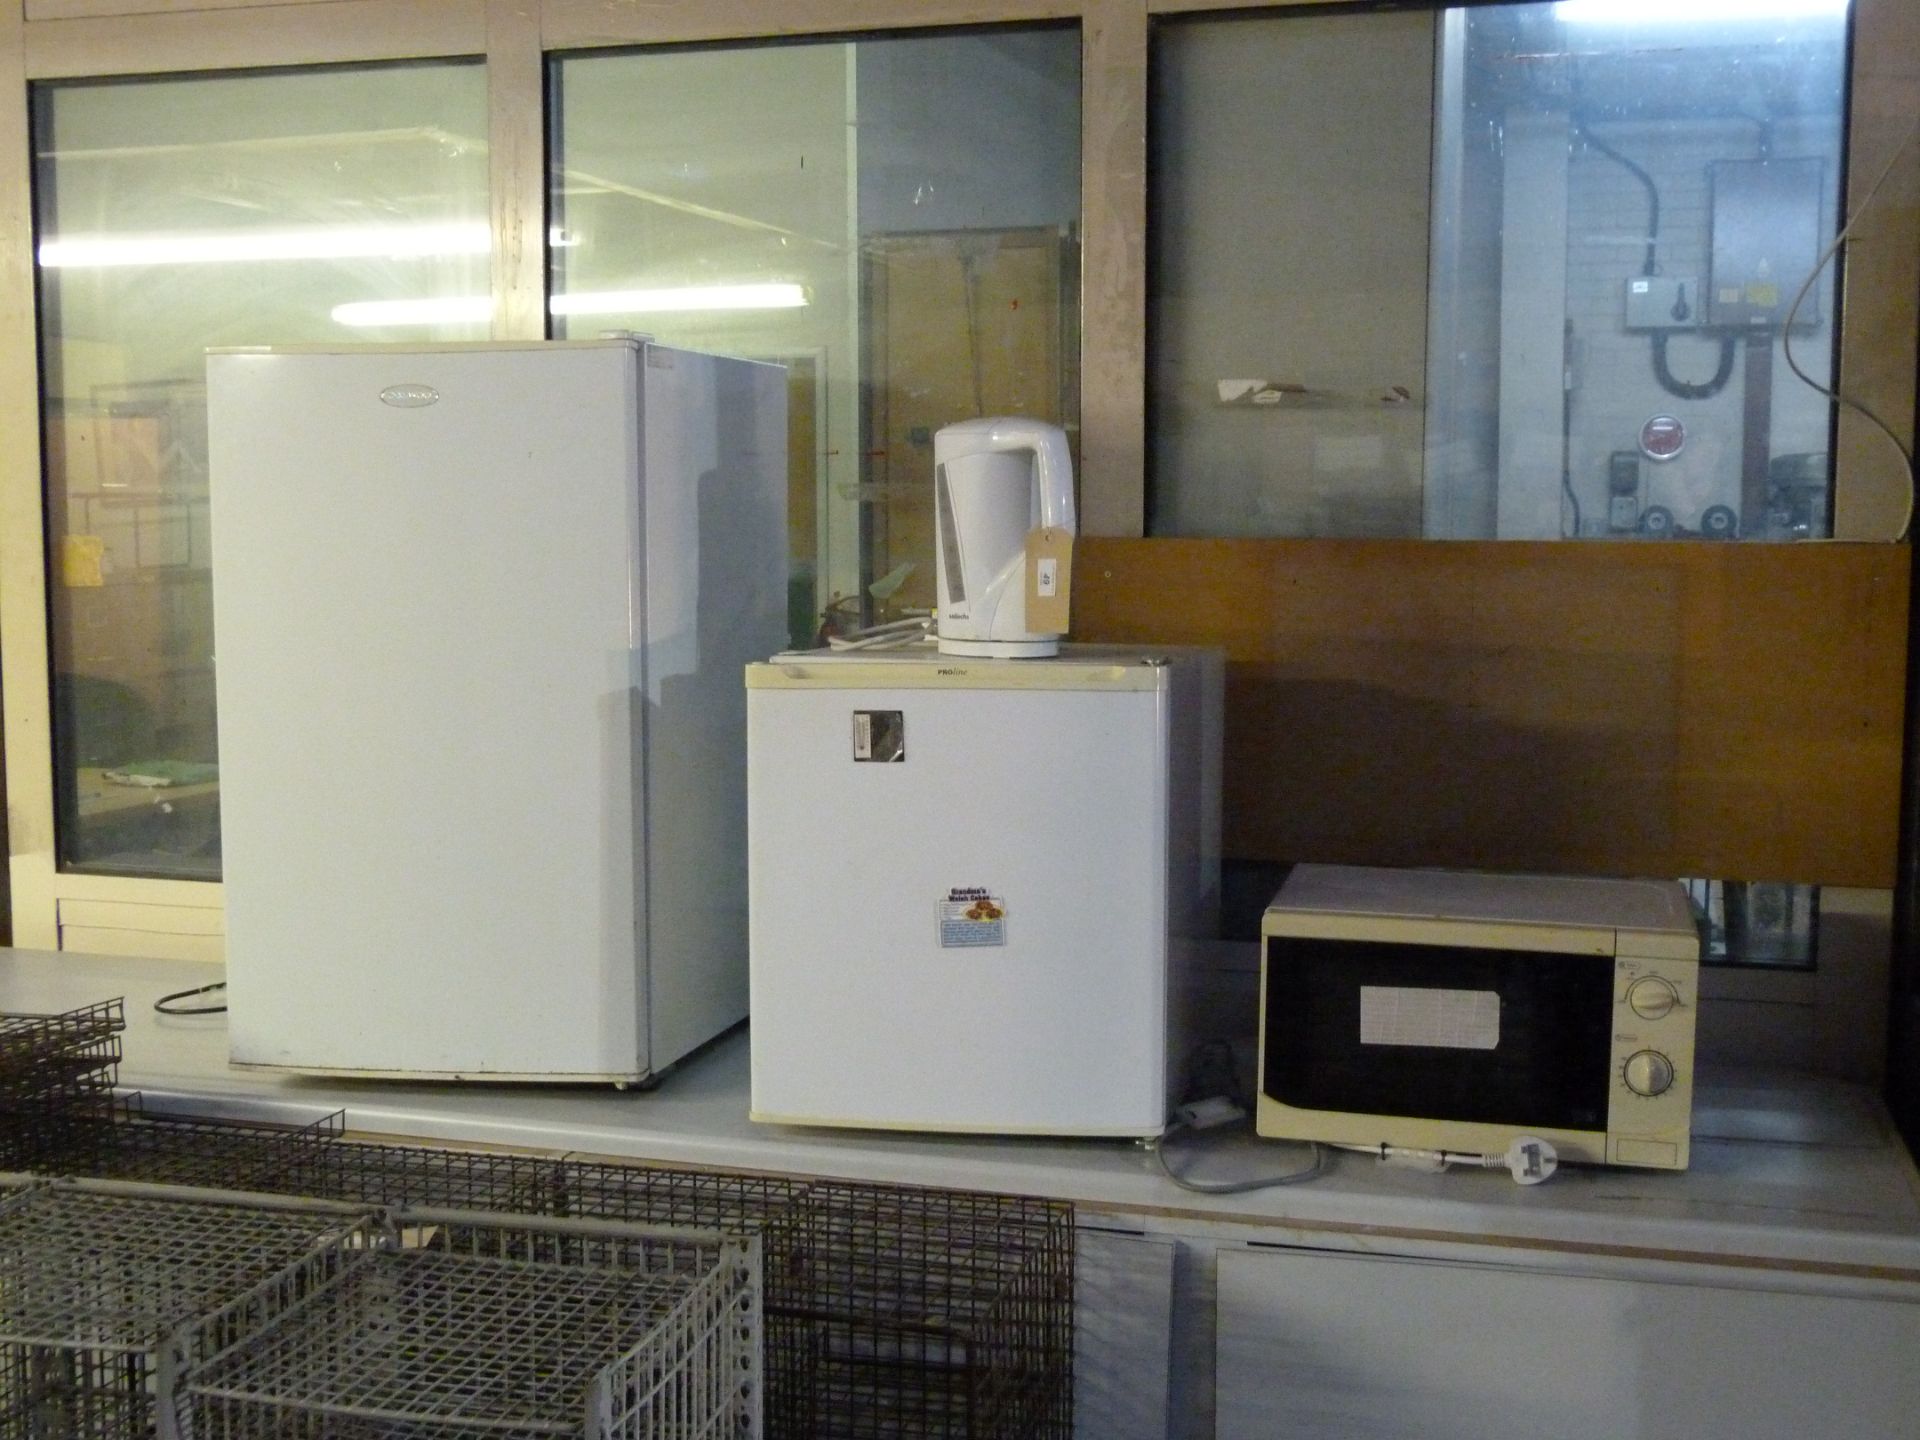 A quantity of white goods to include fridges, kettles, etc.